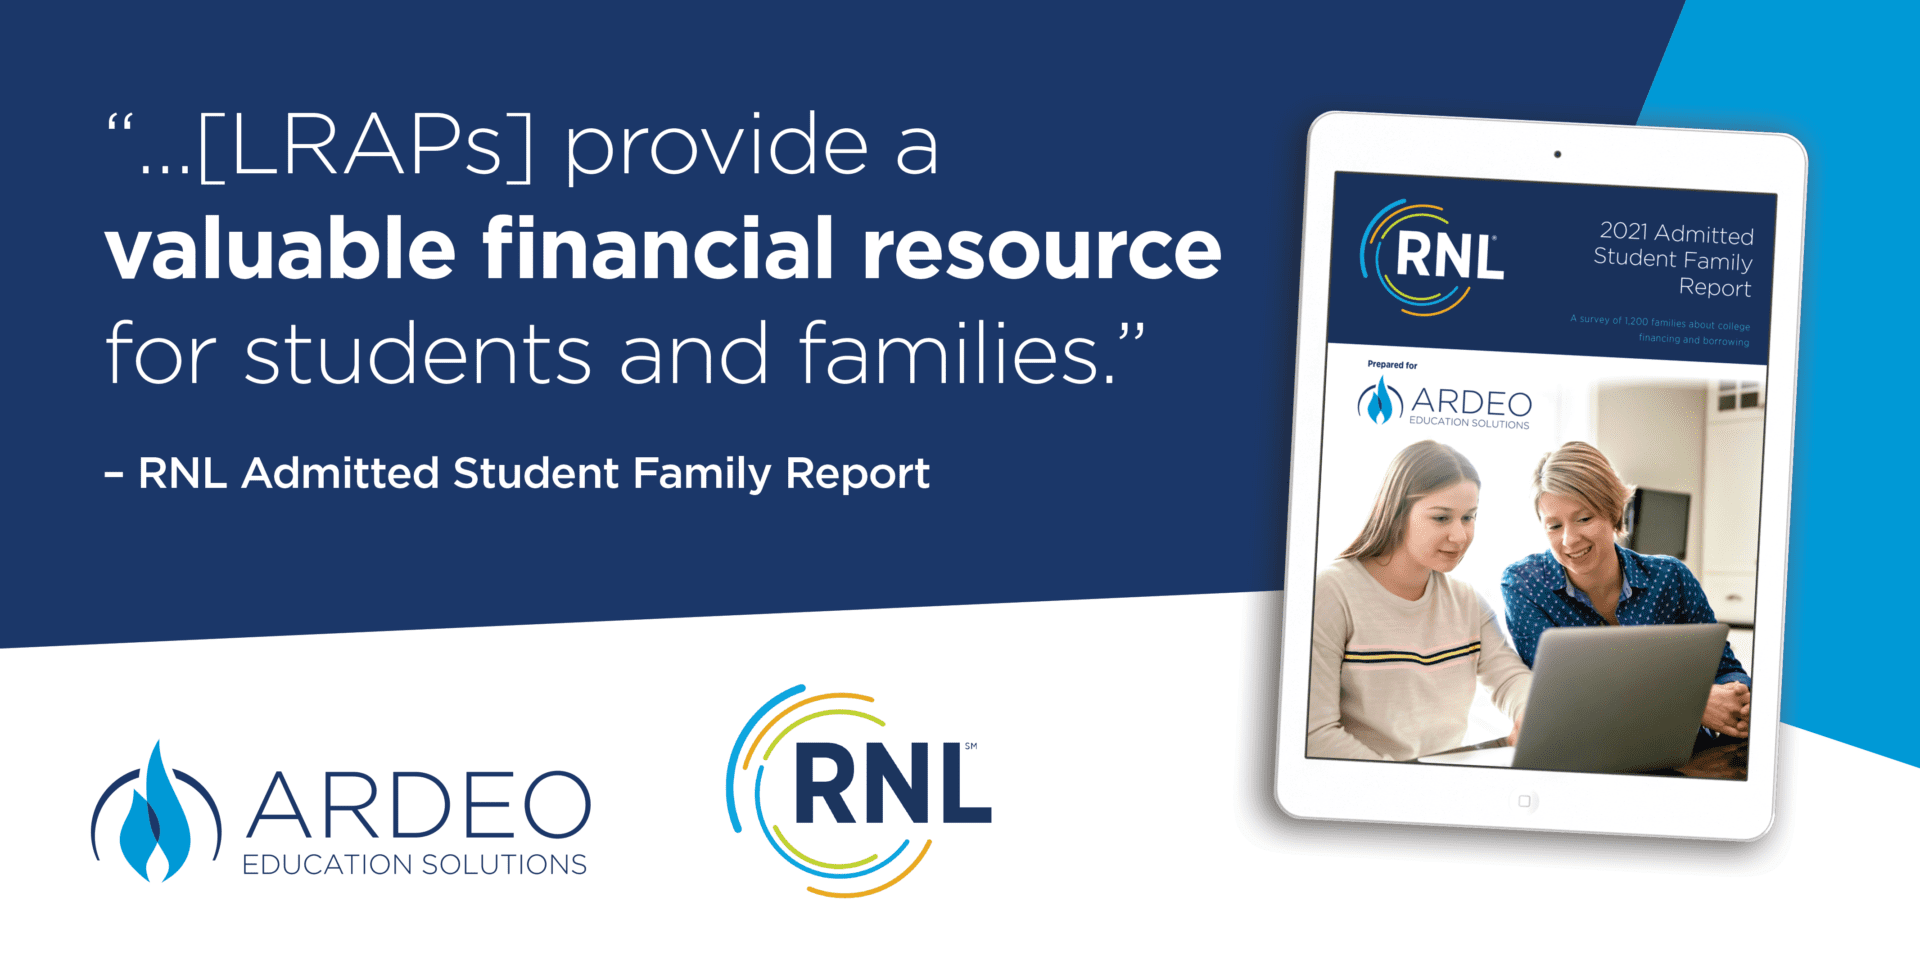 RNL Admitted Student Family Report quote